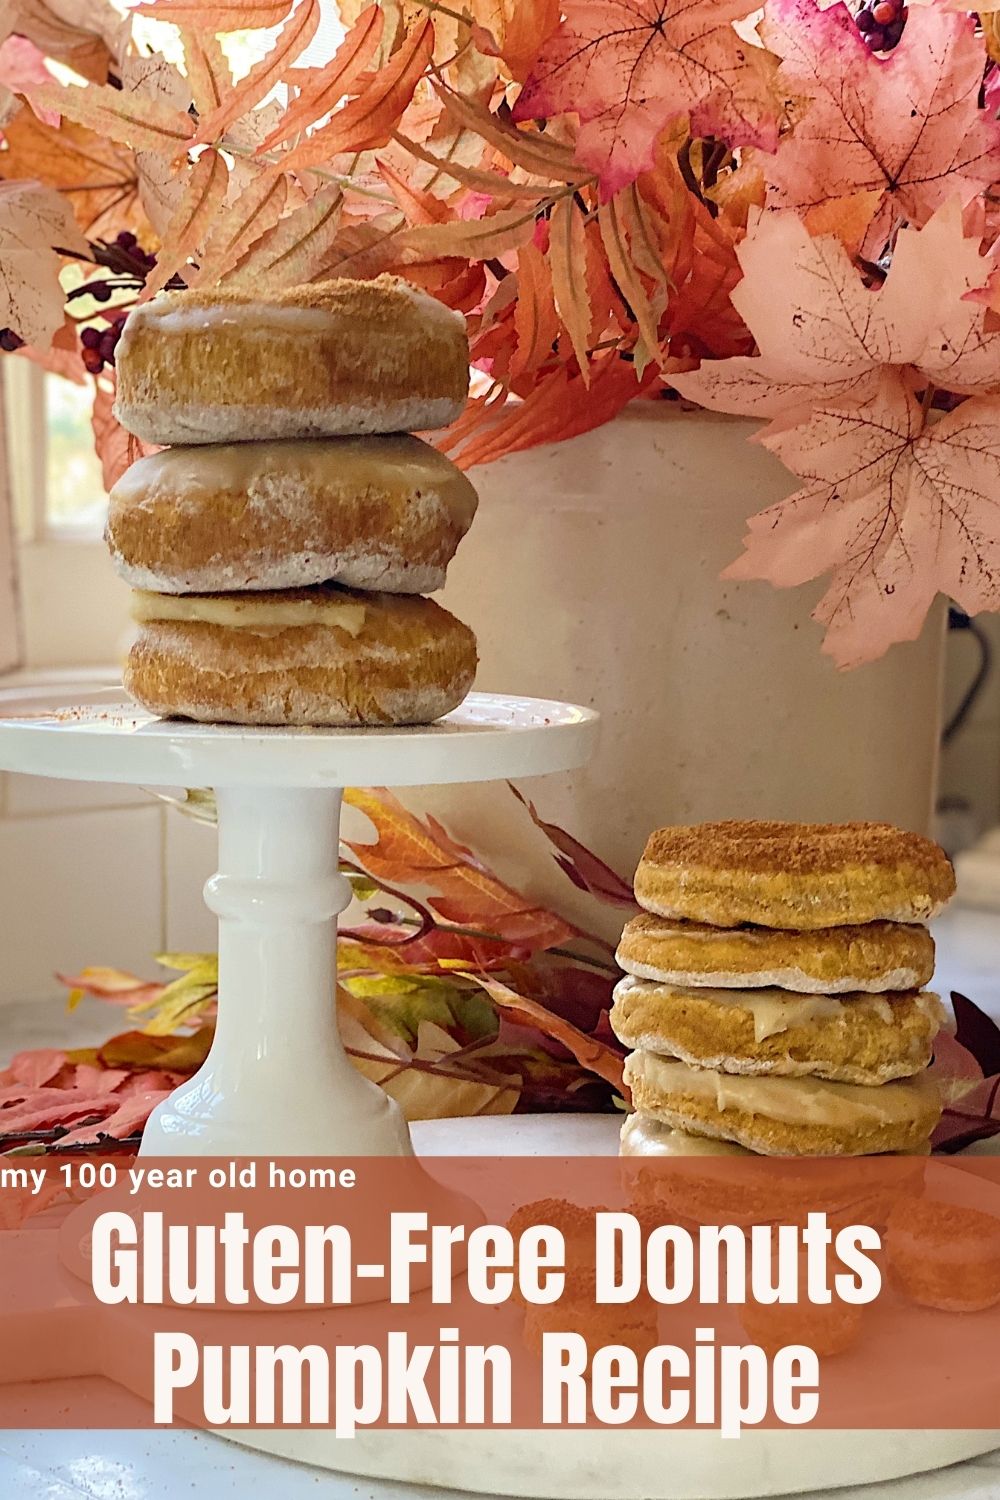 Pumpkin Gluten-Free Donuts are an incredible way to start your day. Nothing says cozy and homey like pumpkin, right?